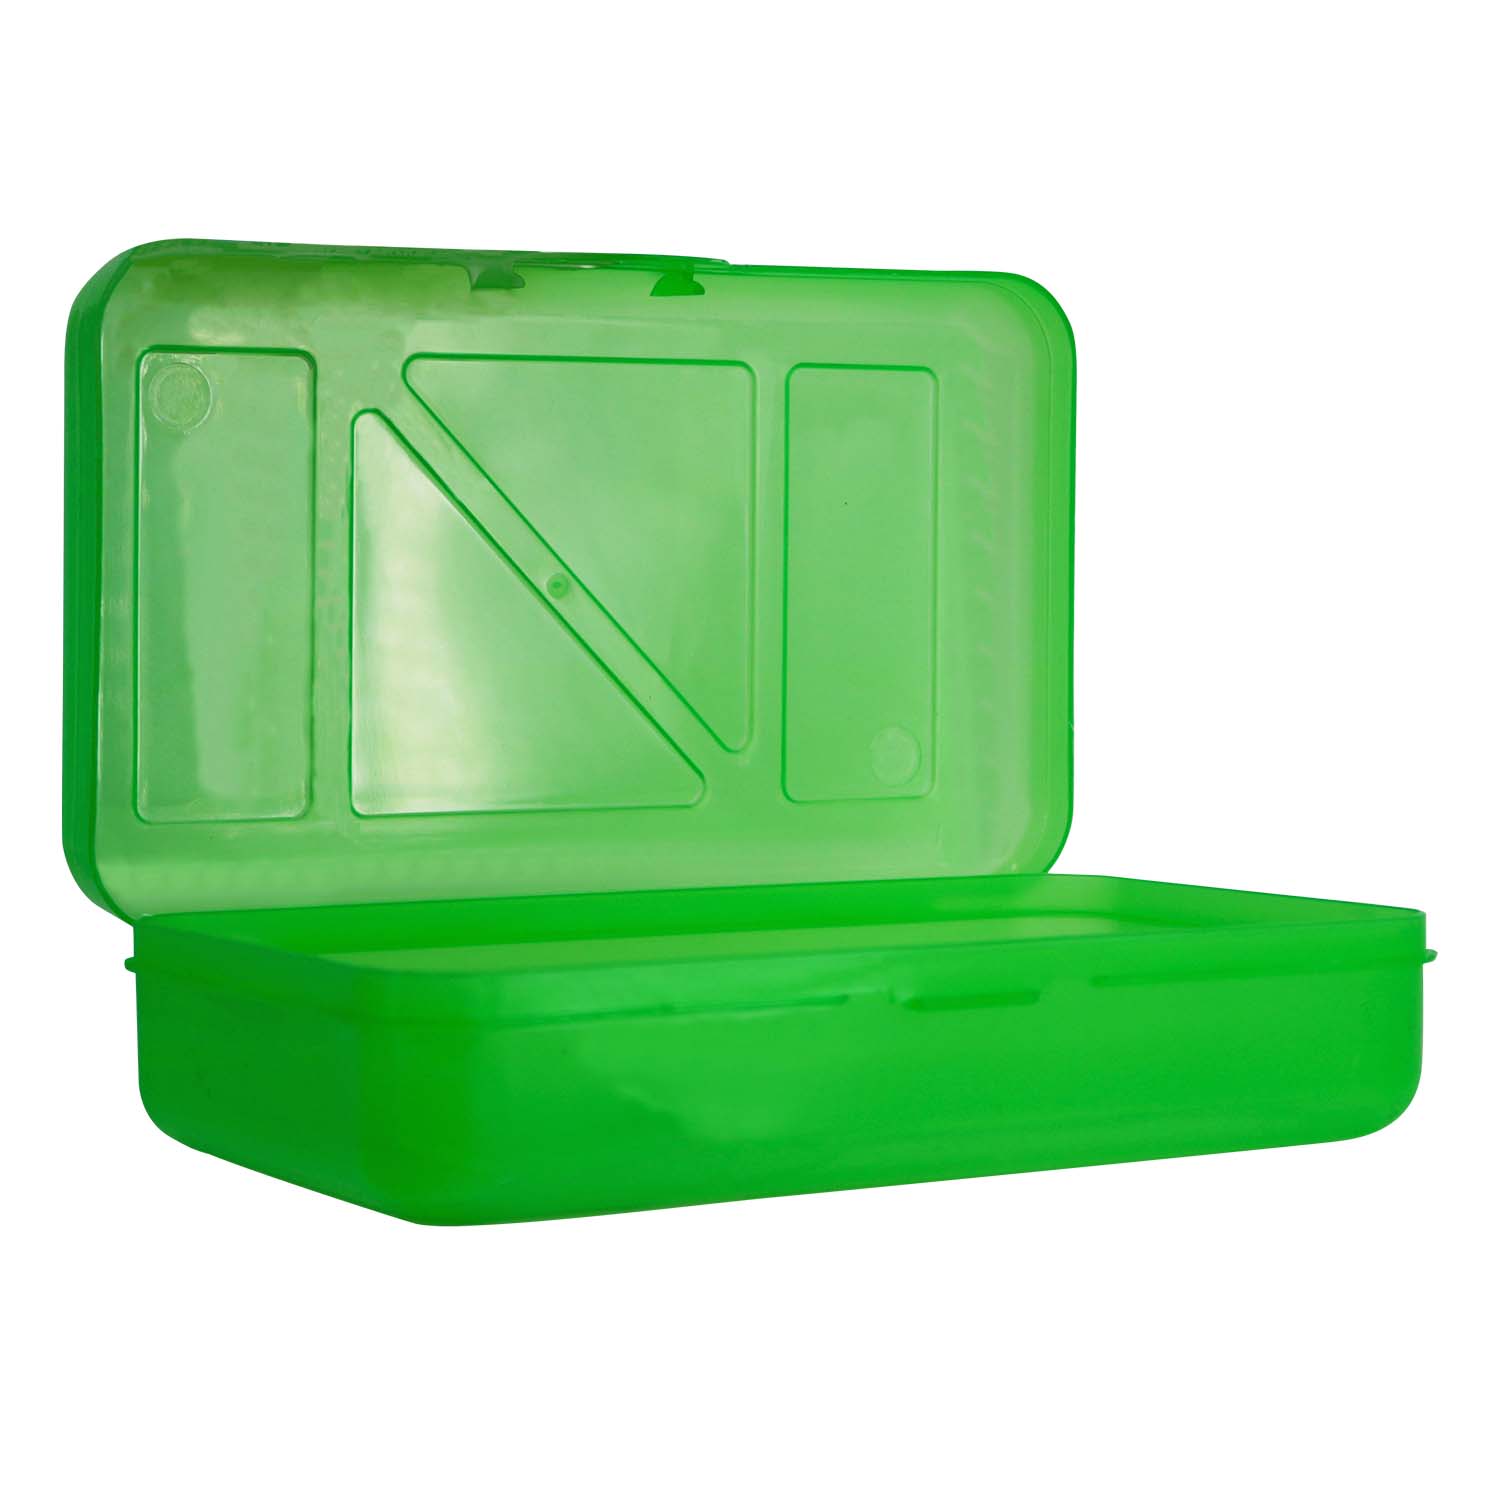 Wholesale Cheap Stationary Cases - Buy in Bulk on